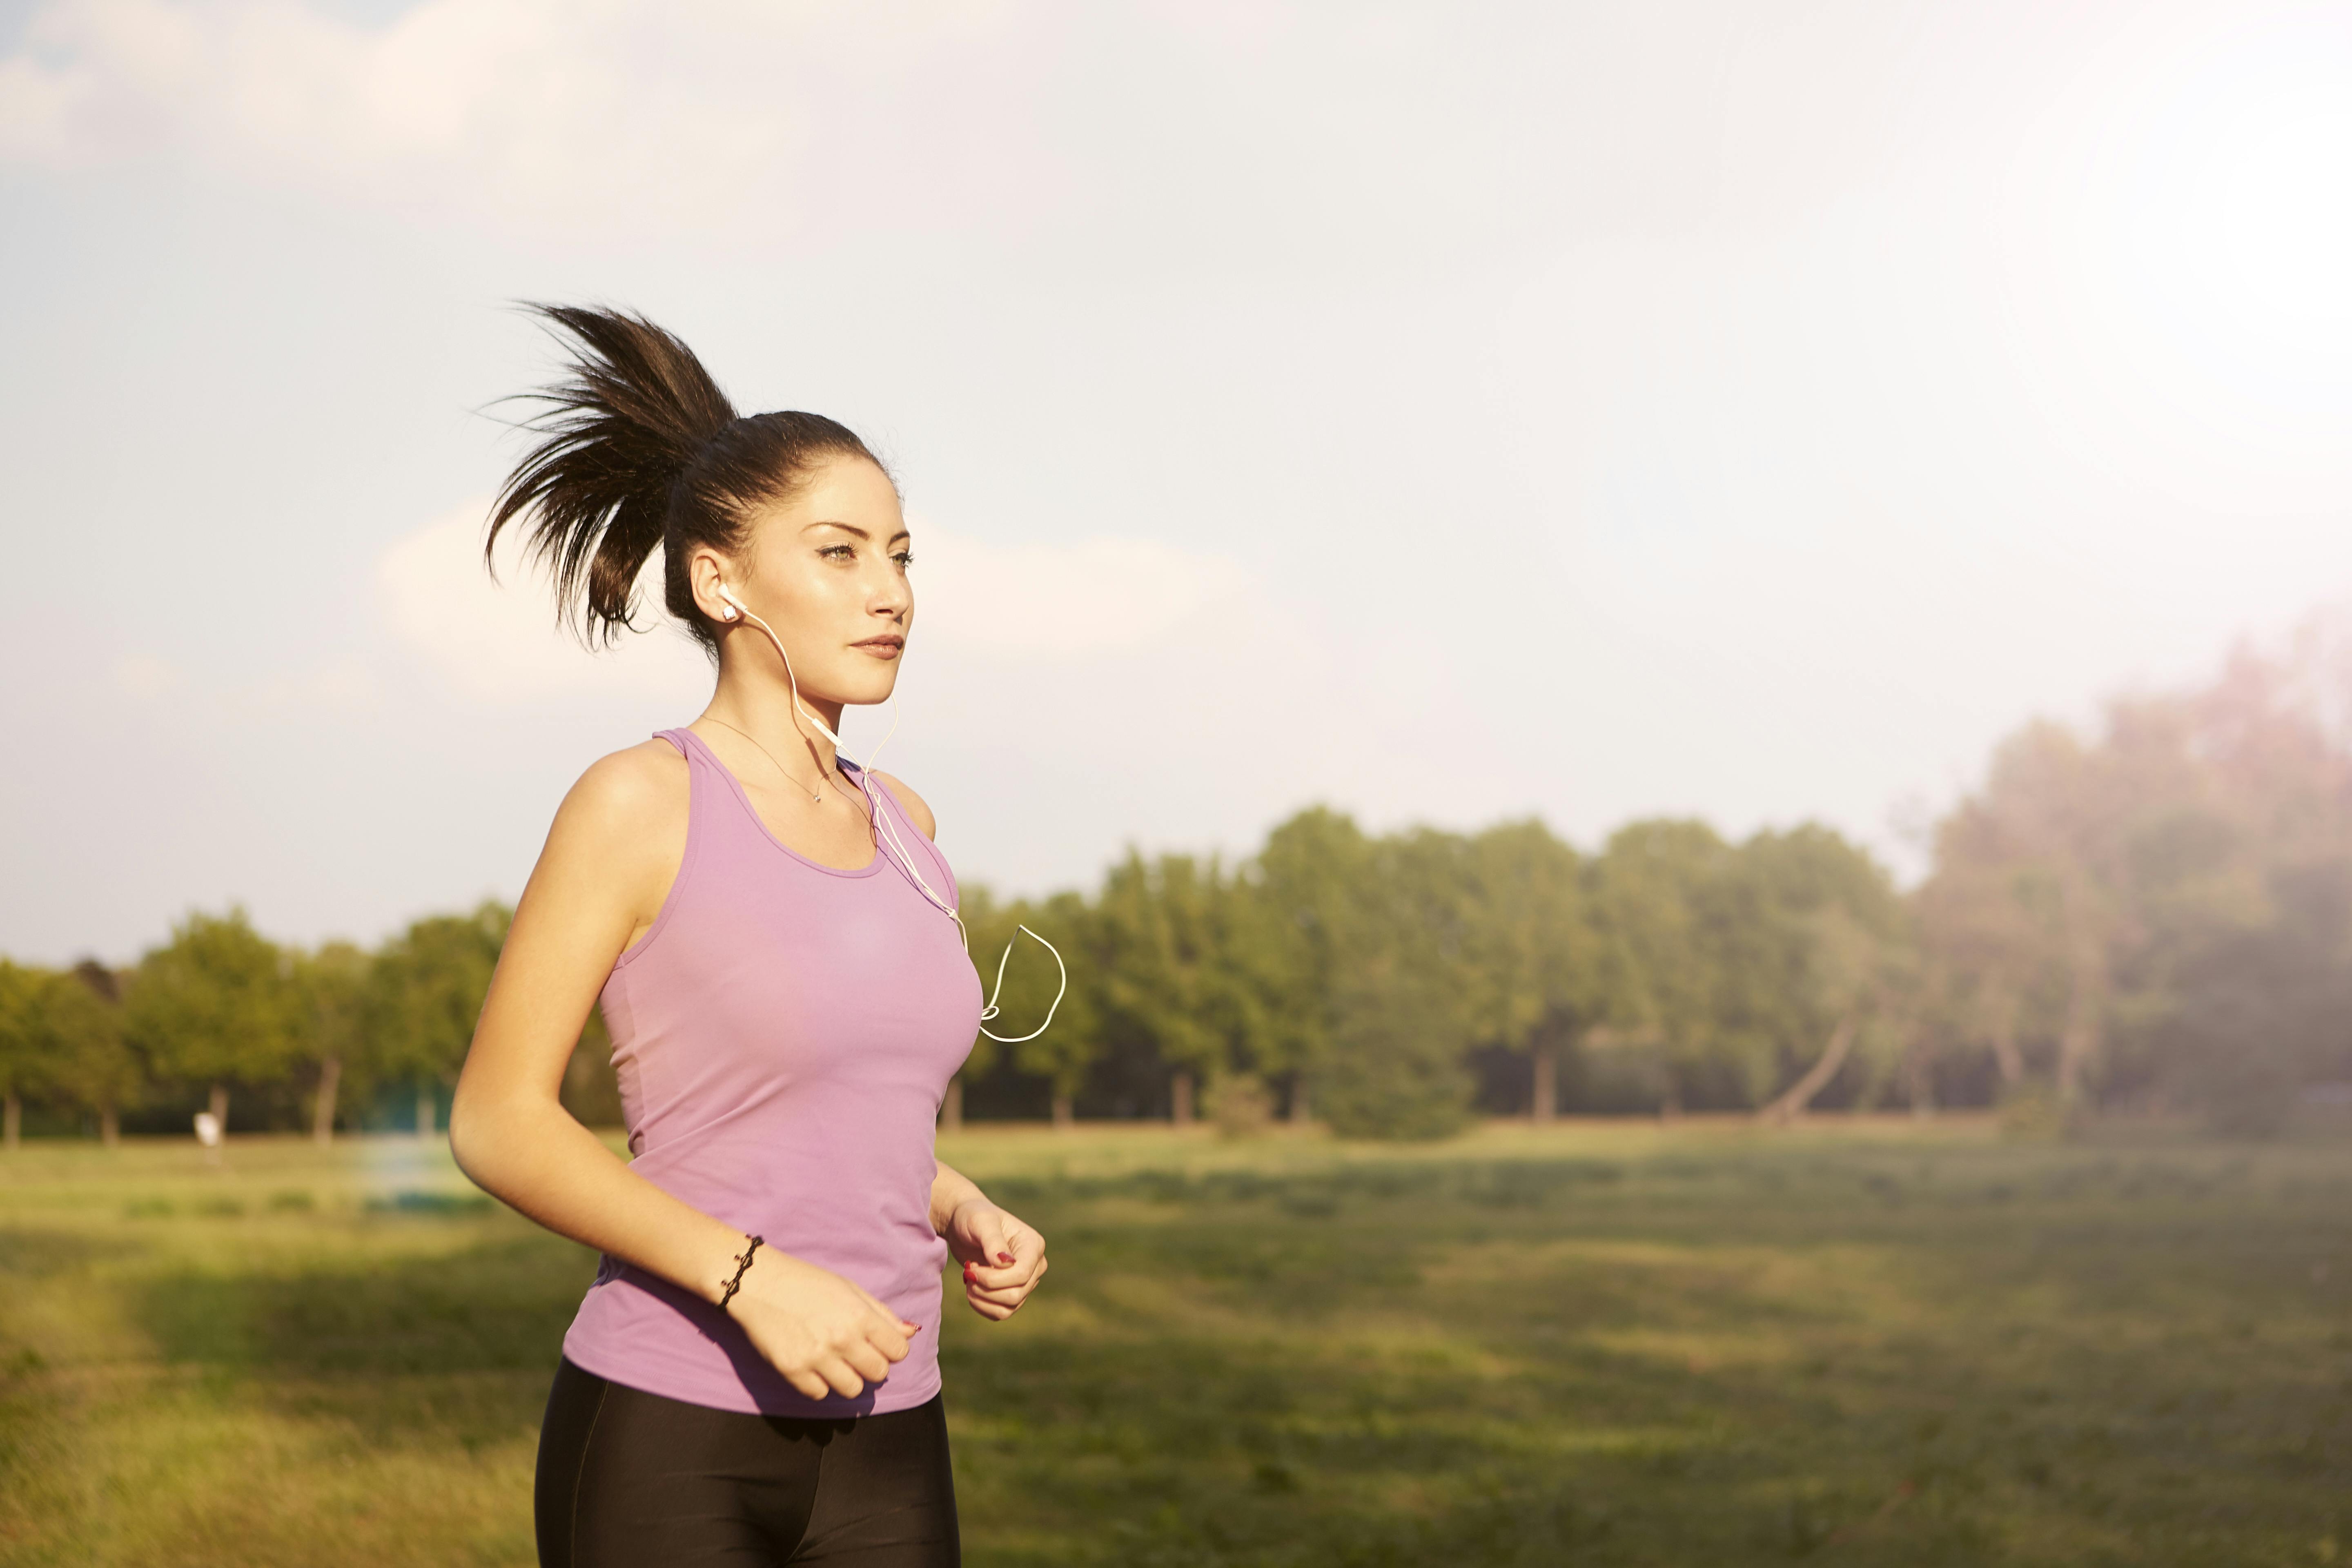 Jogging Photos, Download The BEST Free Jogging Stock Photos & HD